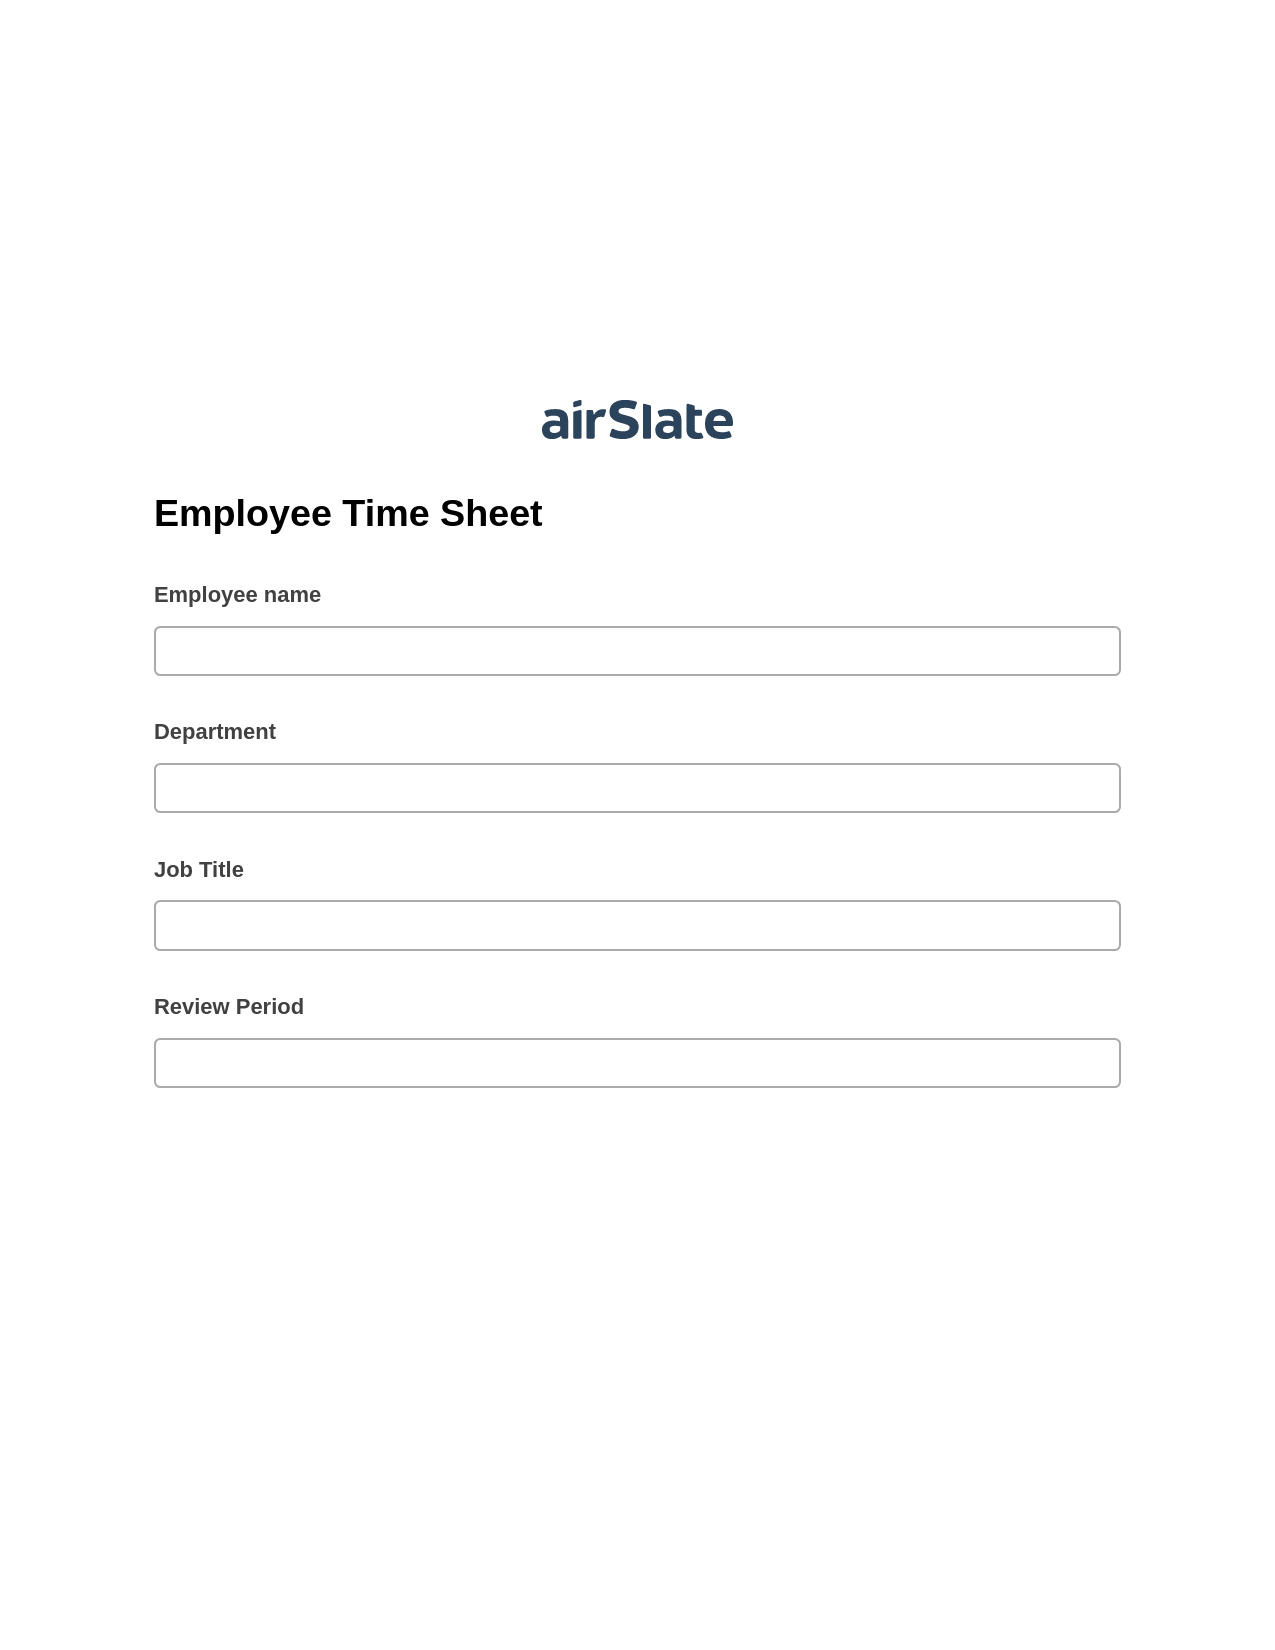 Employee Time Sheet Pre-fill from CSV File Bot, Text Message Notification Bot, Archive to Box Bot